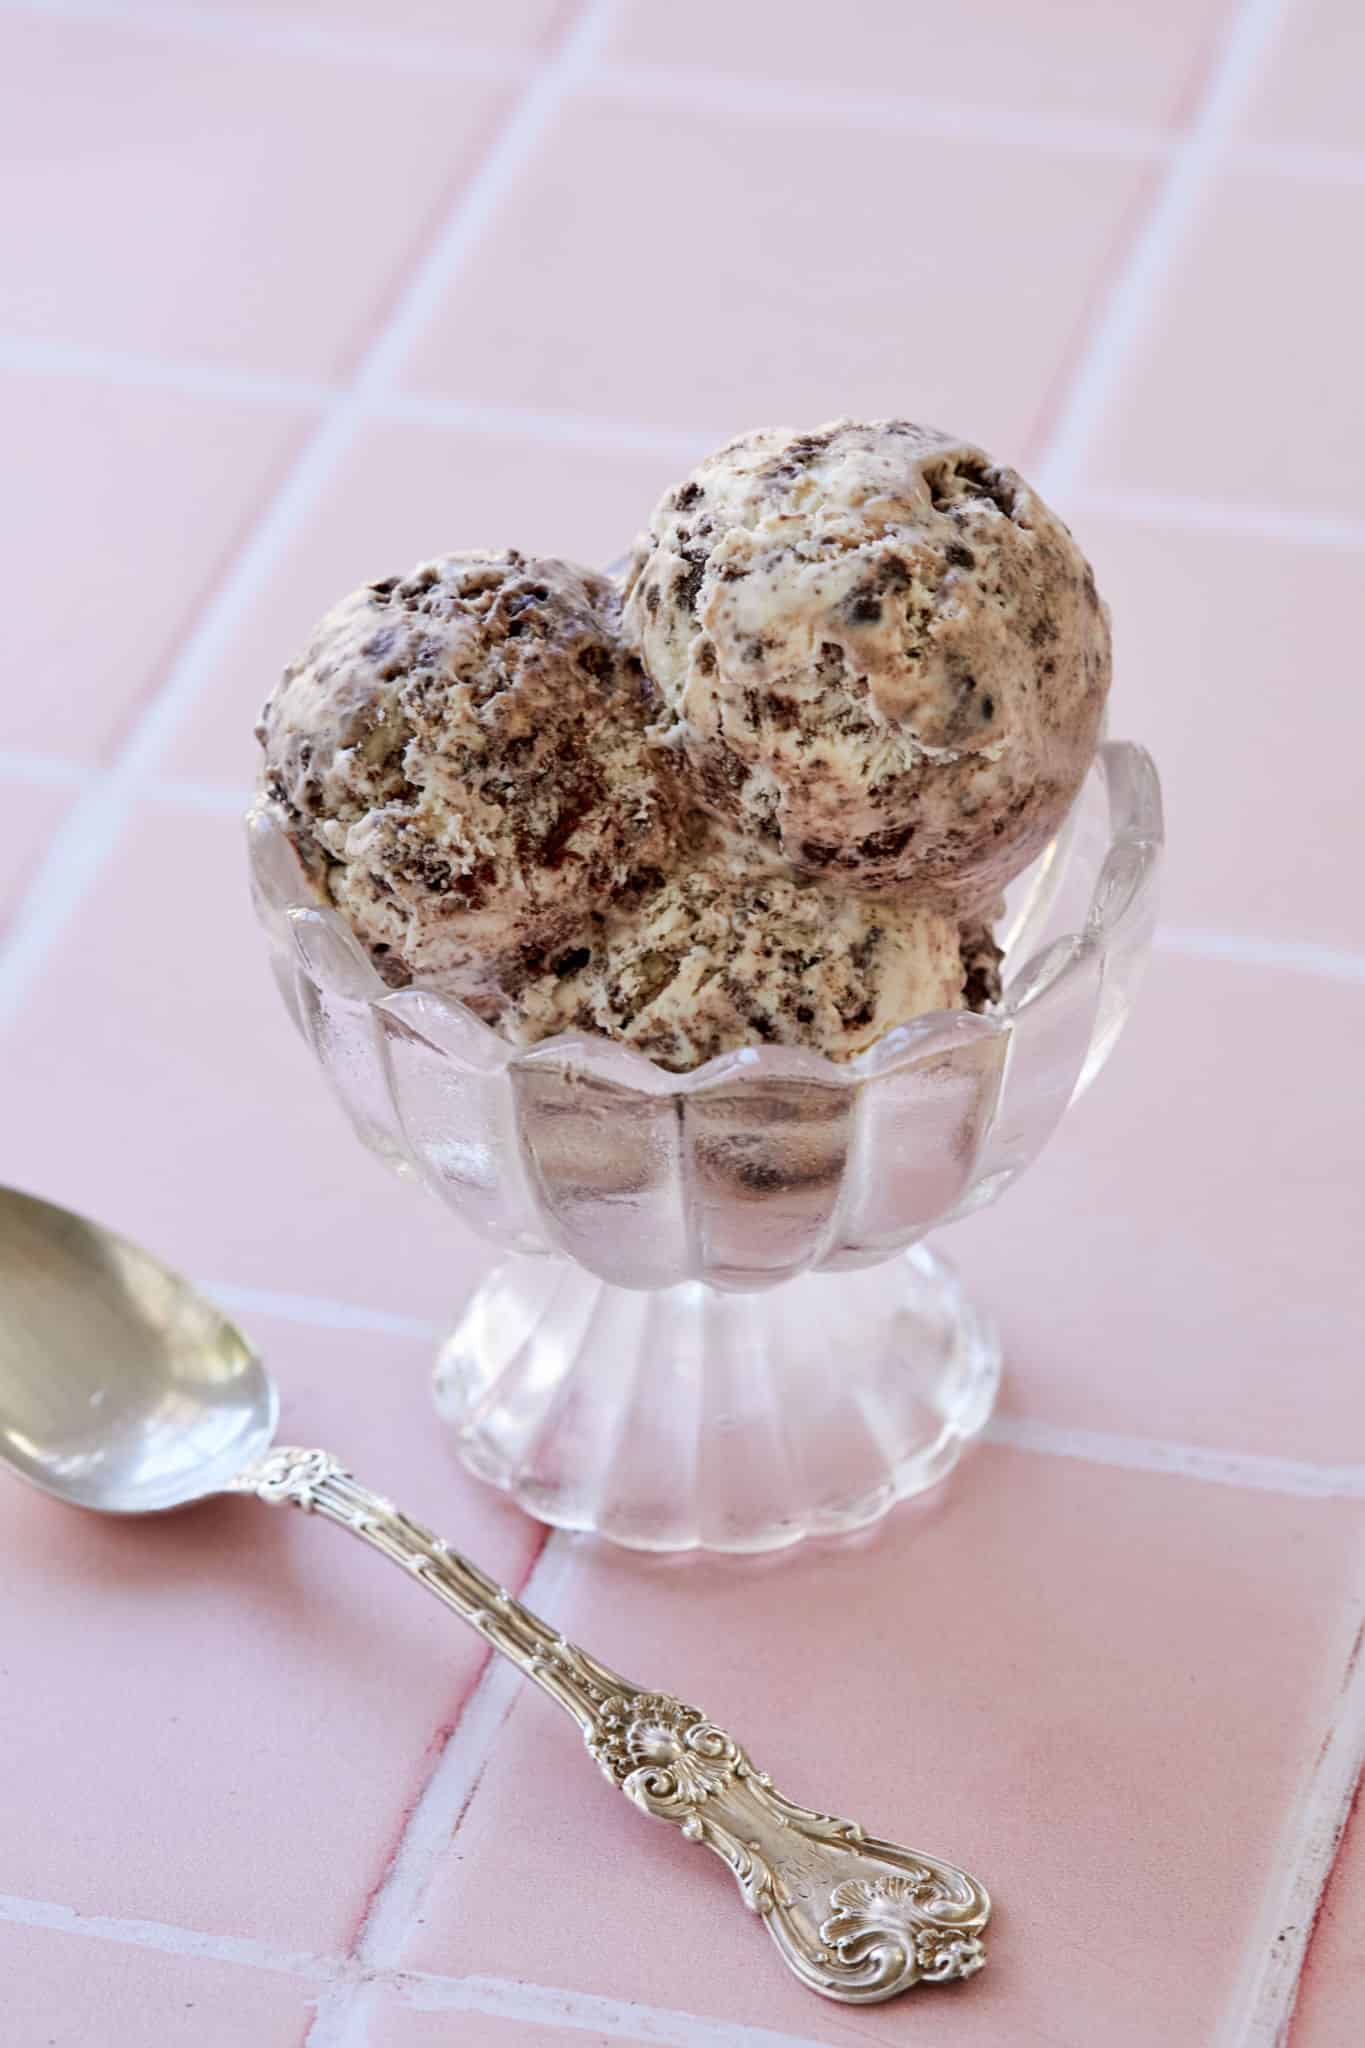 Cookies and Cream Ice Cream scooped in a bowl